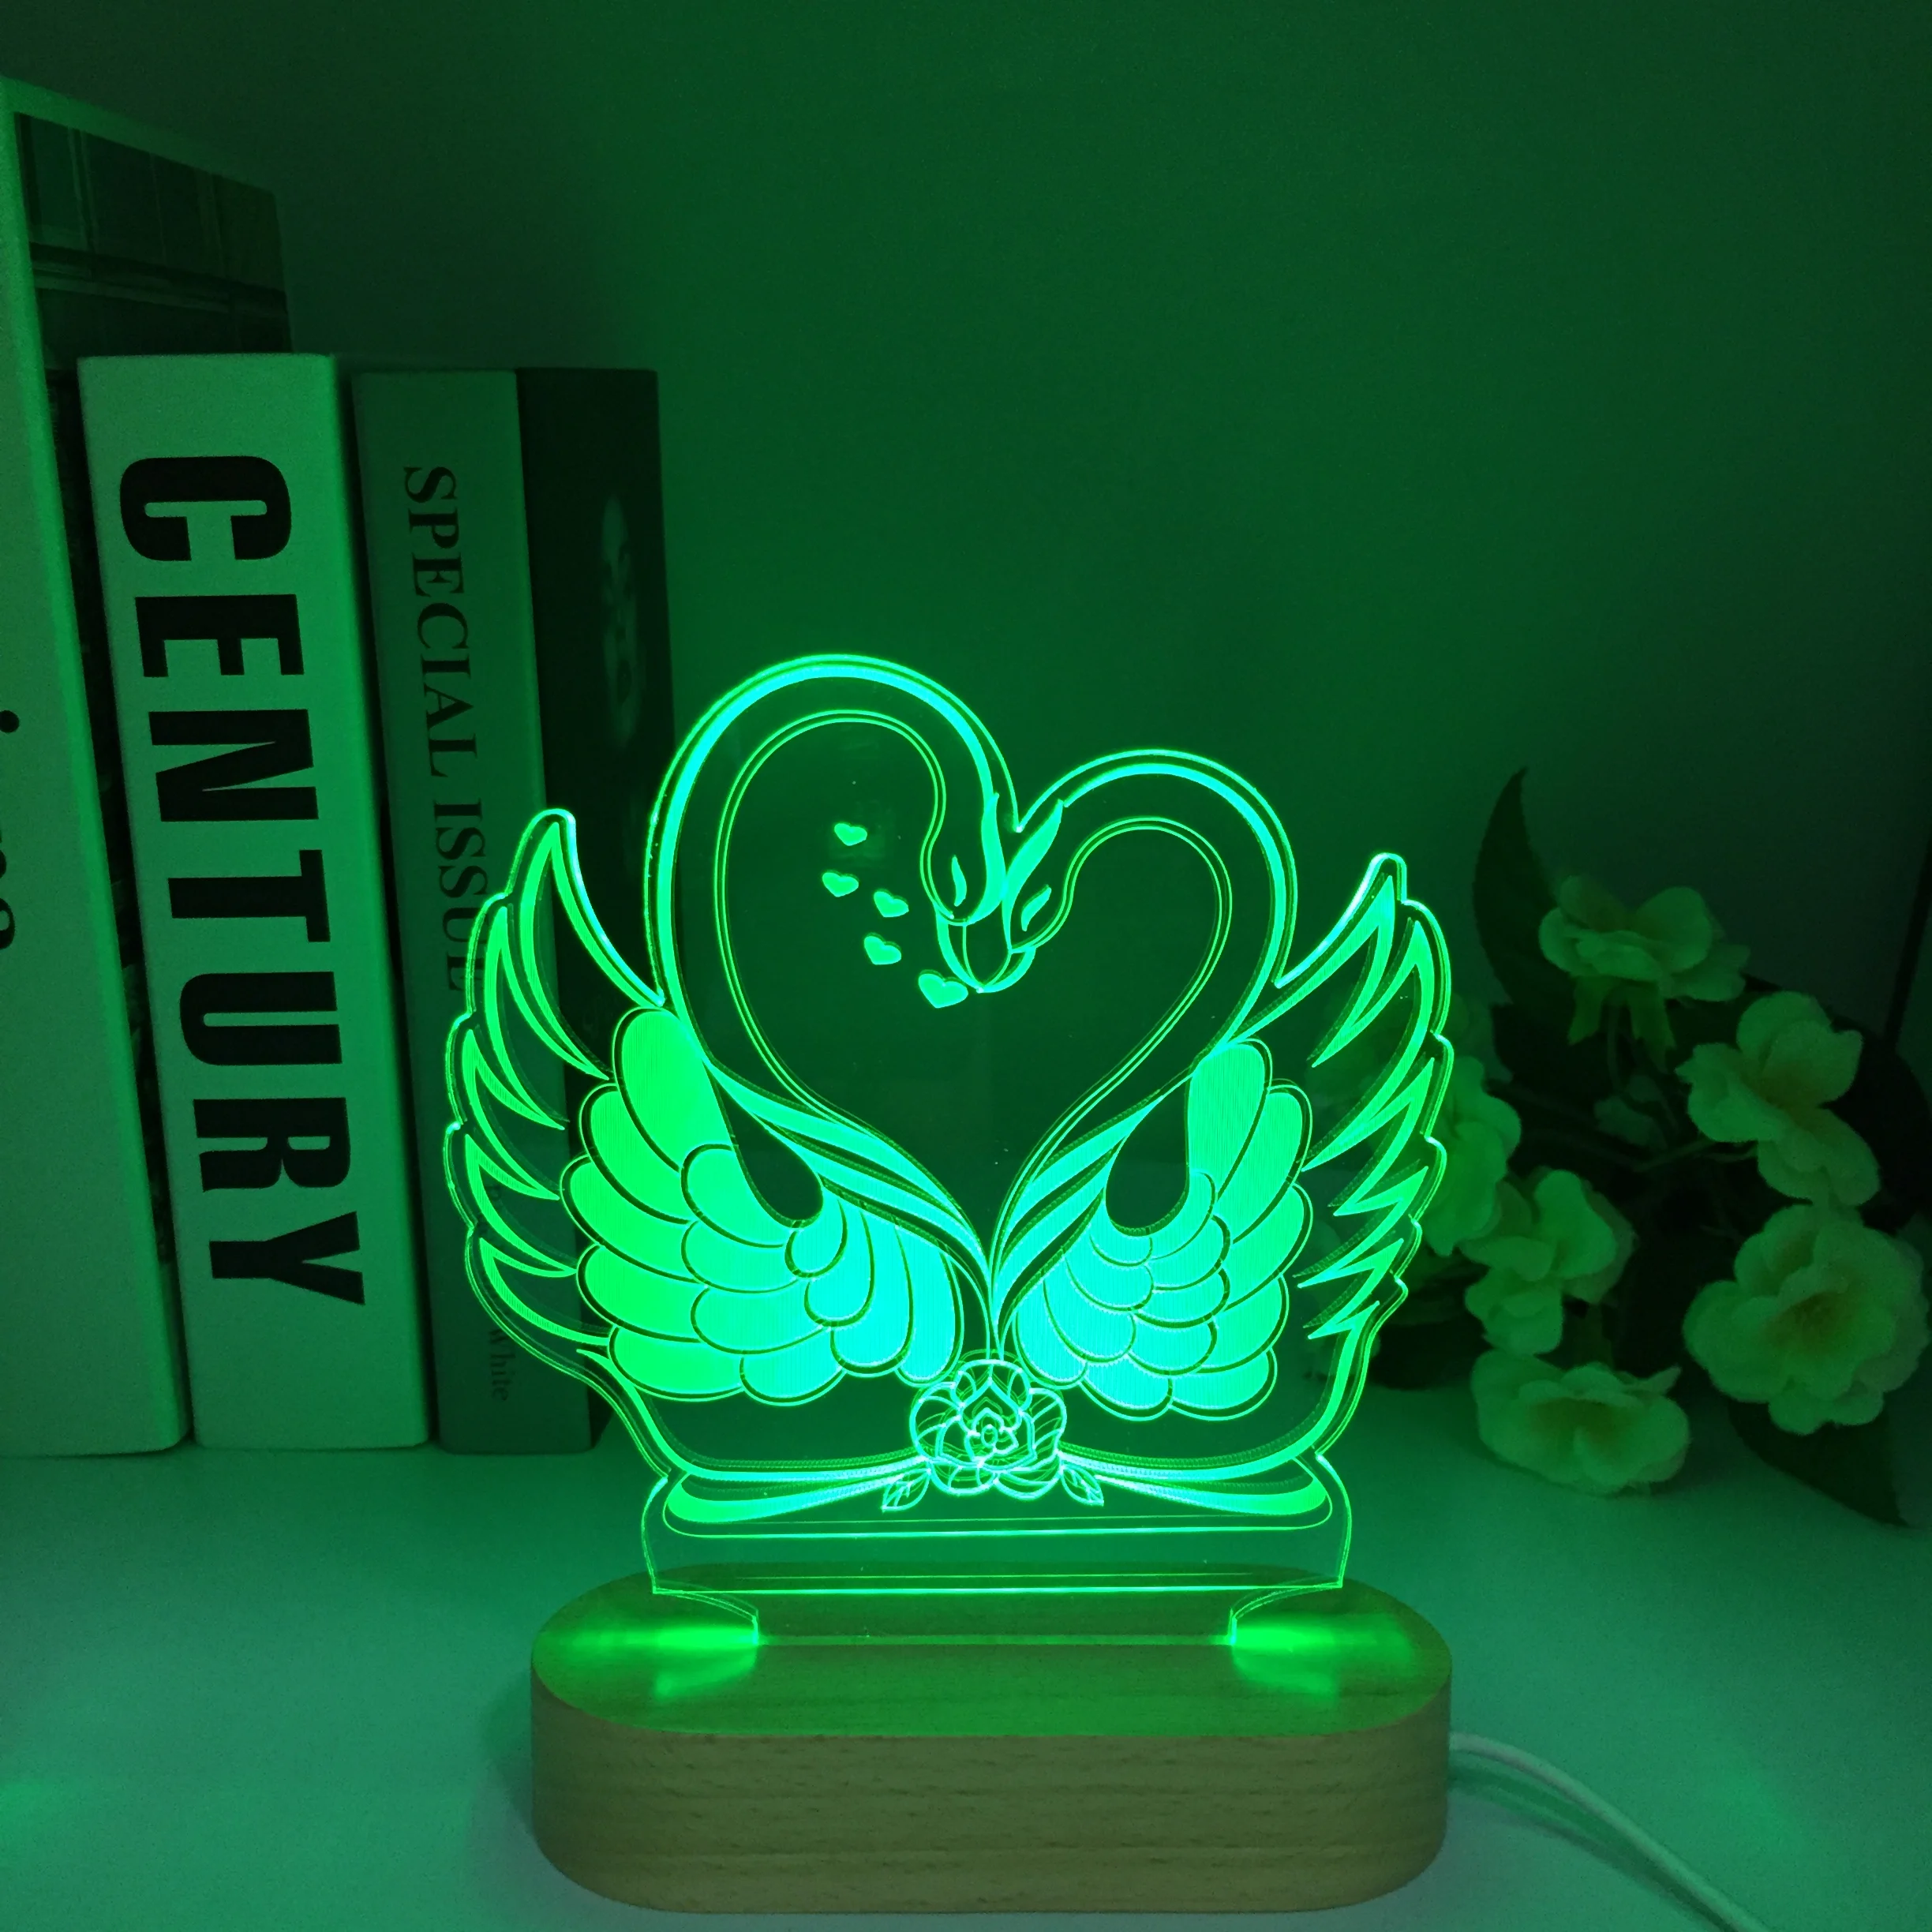 

3D Swan Wooden Night Light for Kids Birthday Gifts USB LED Table Lamp Illusion 16 Color Changing Nightlight for Room Decor